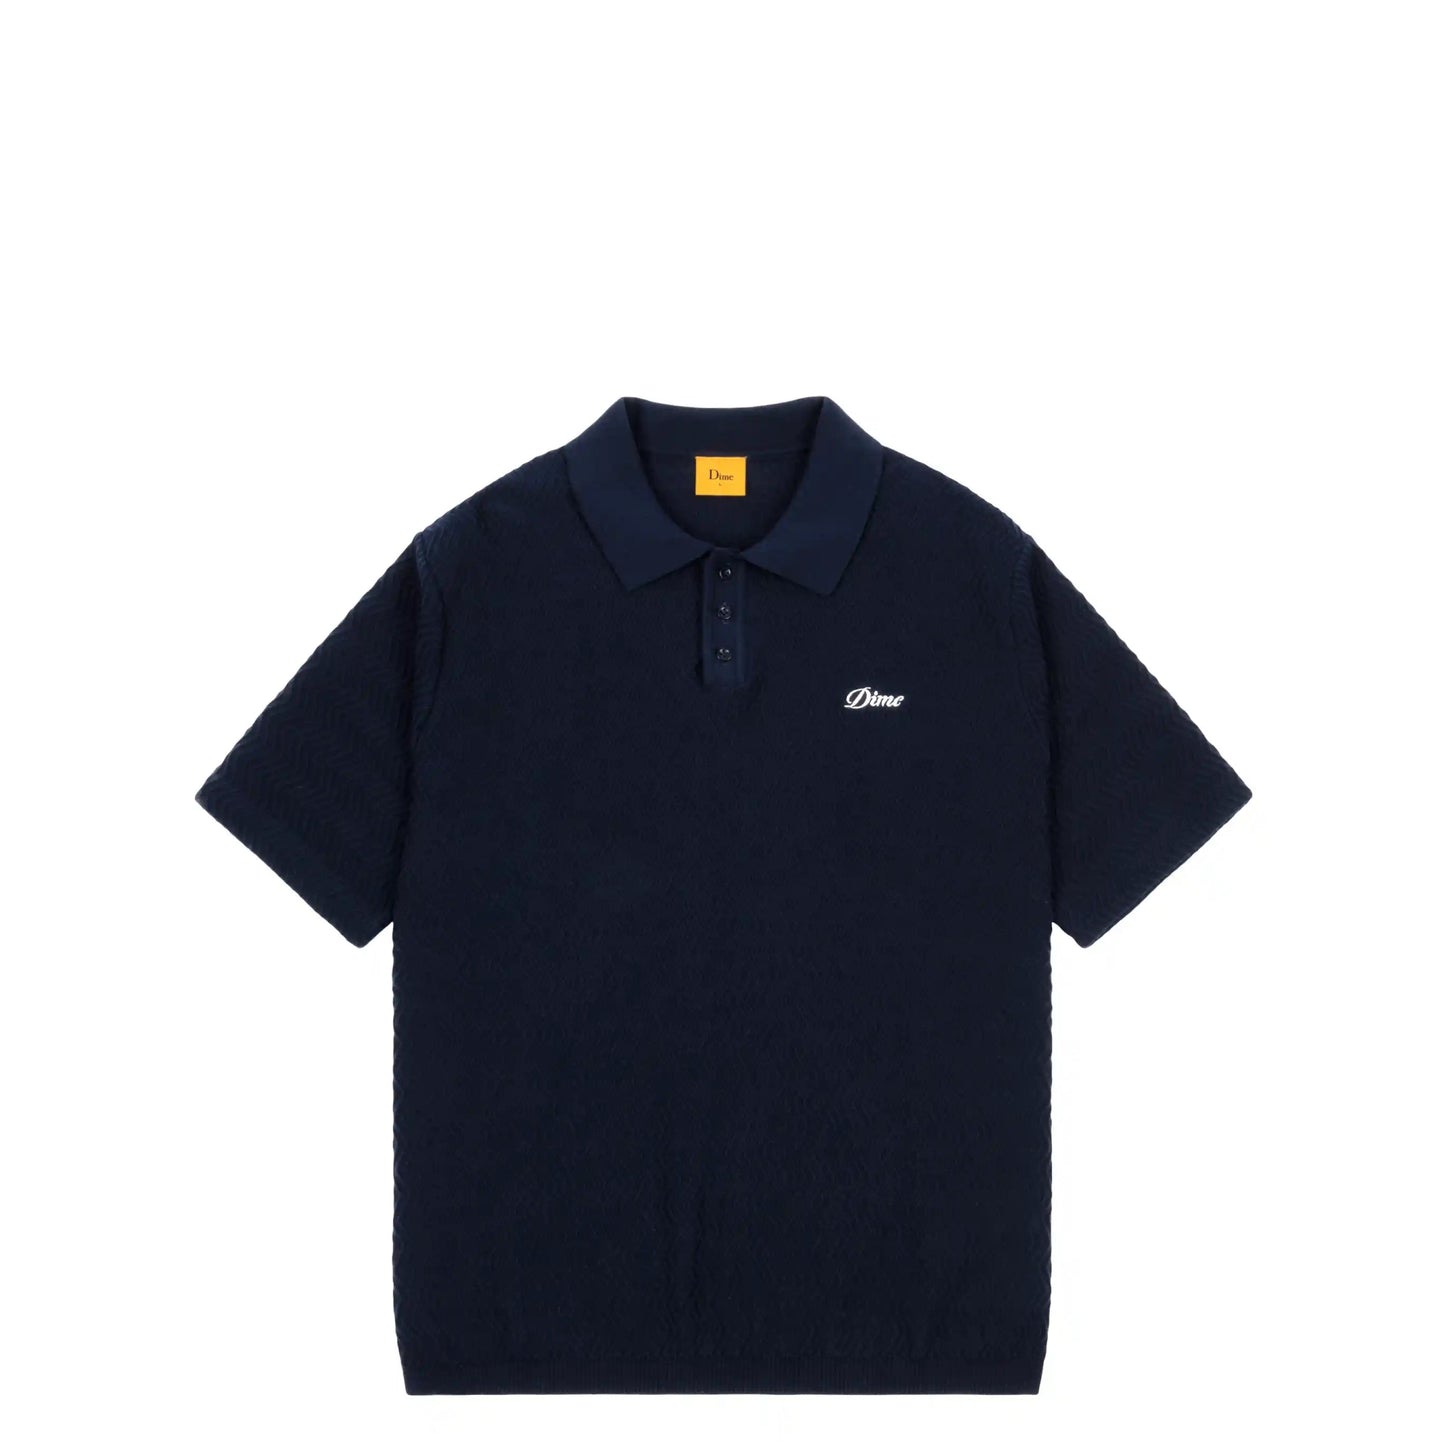 Dime Wave Cable Knit Polo, navy - Tiki Room Skateboards - 1